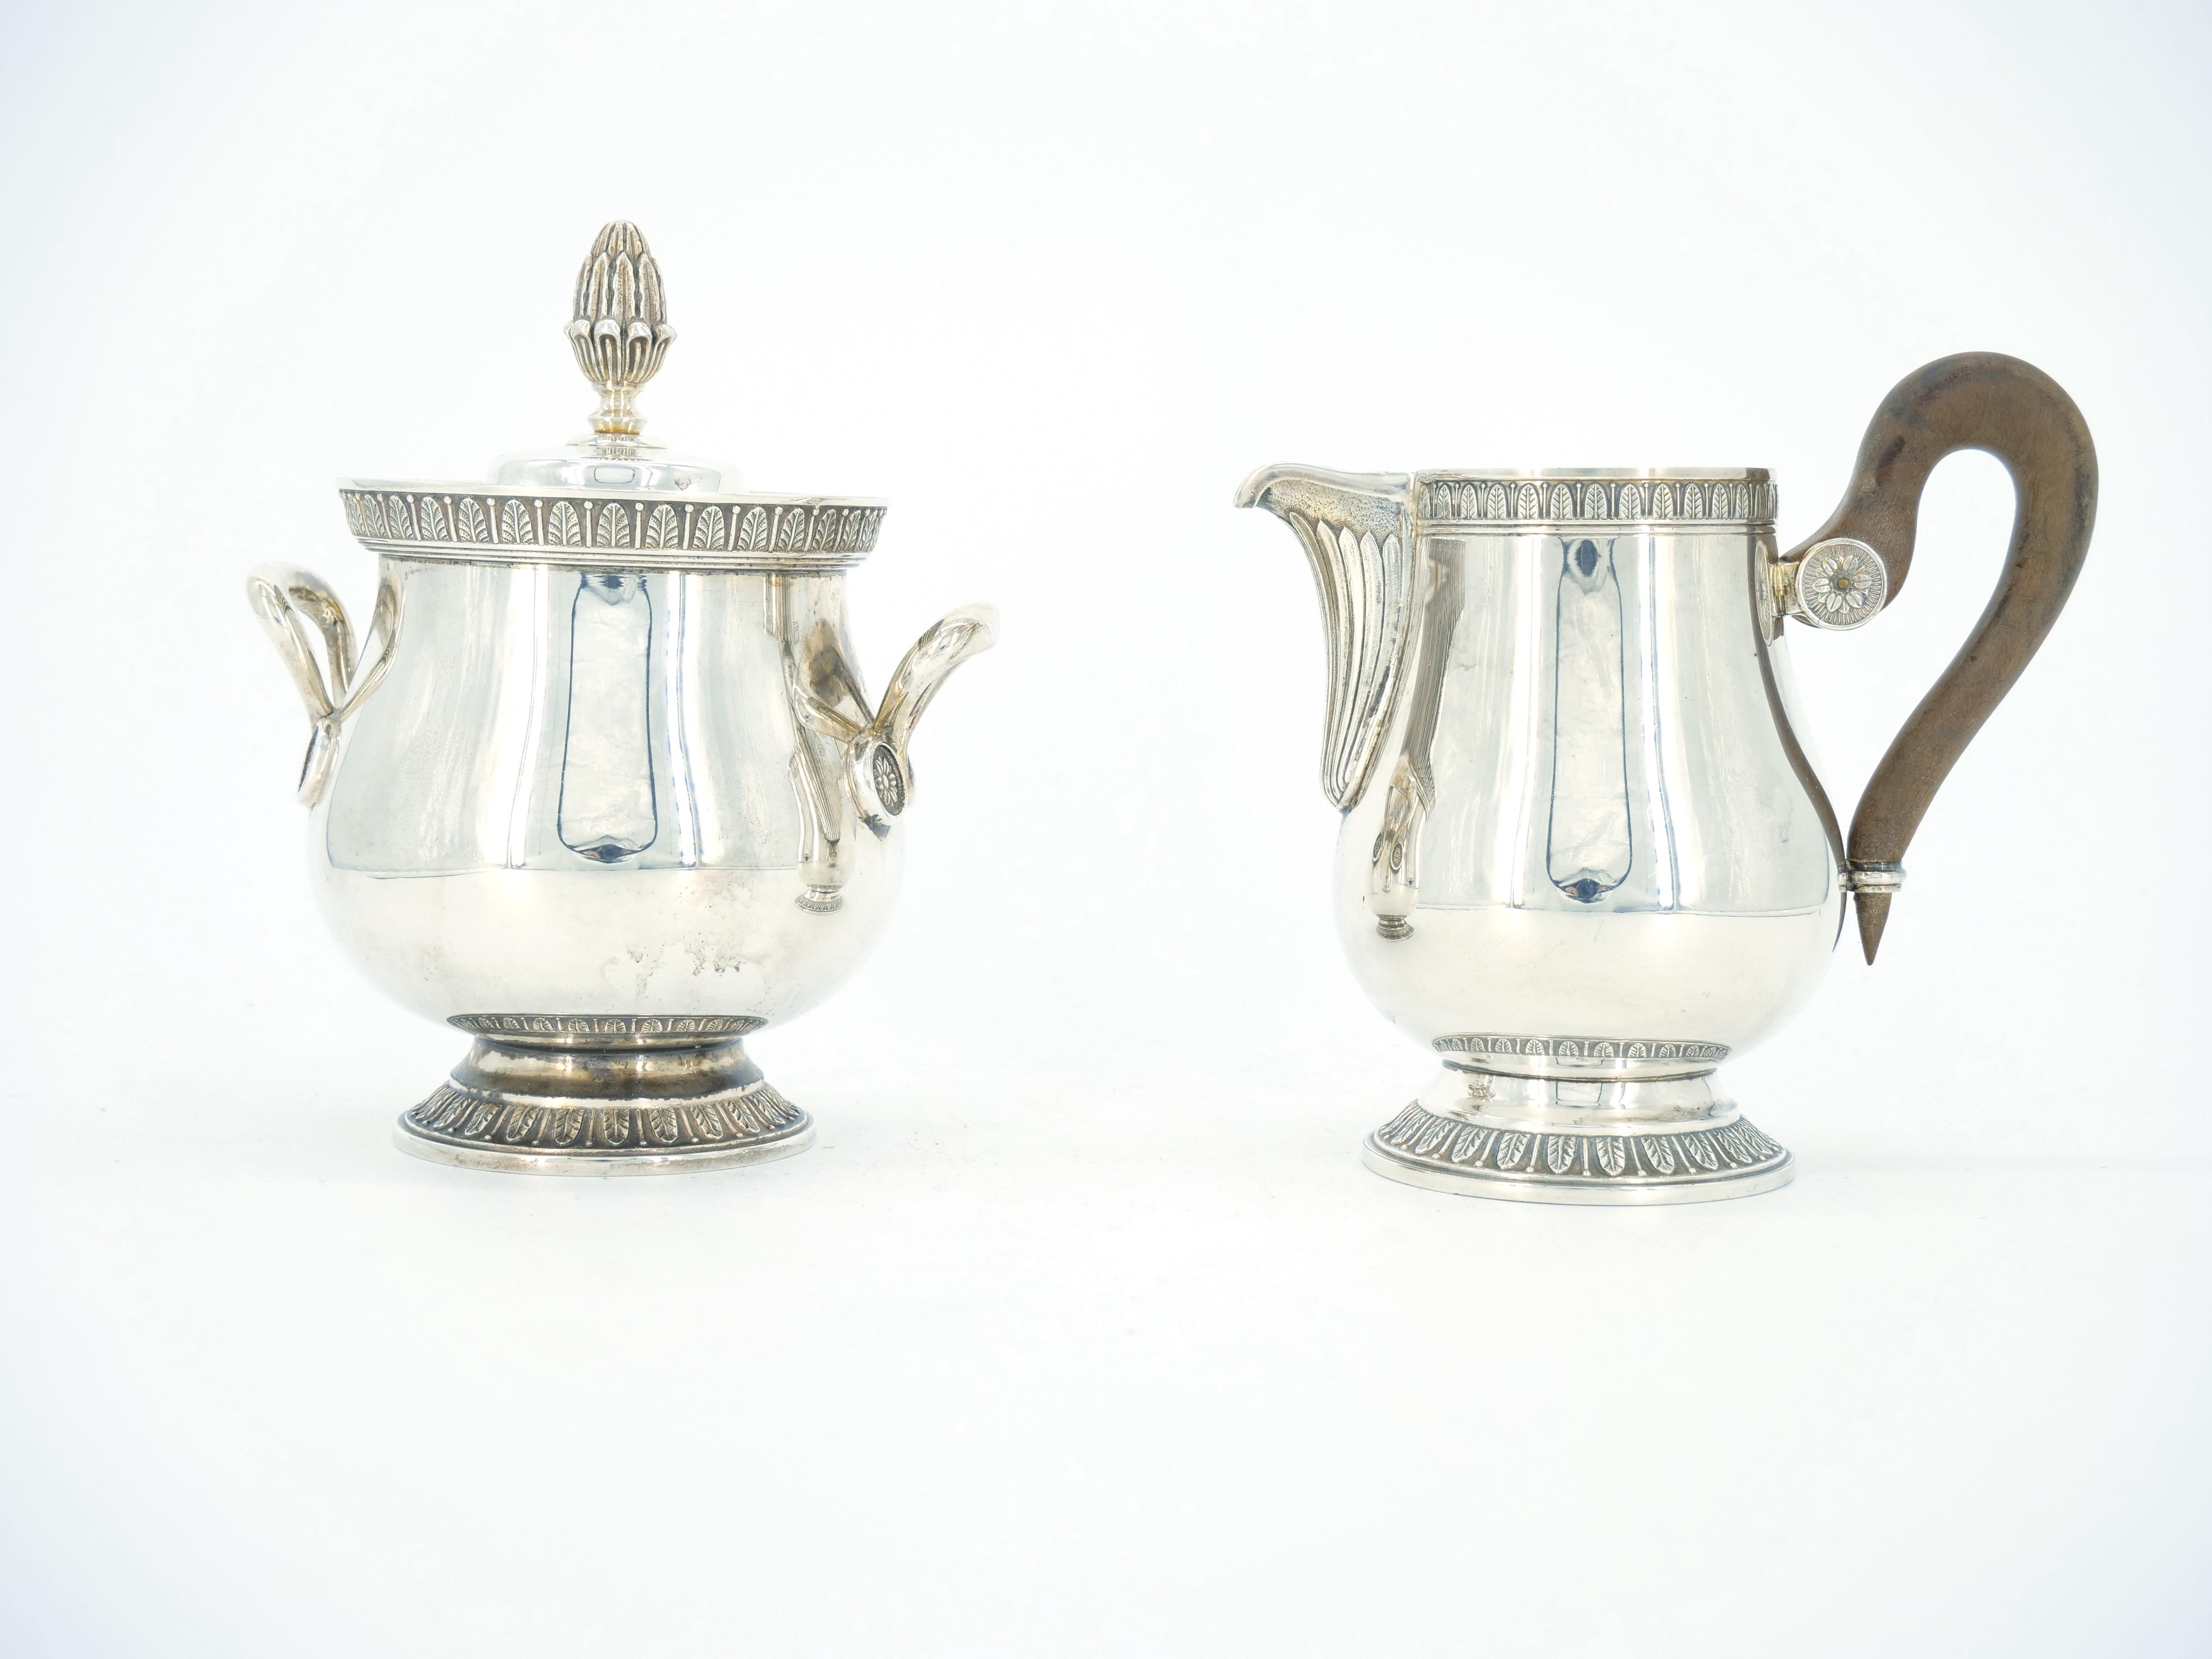 French Silver Plate Five Piece Tea / Coffee Service by Christofle 1